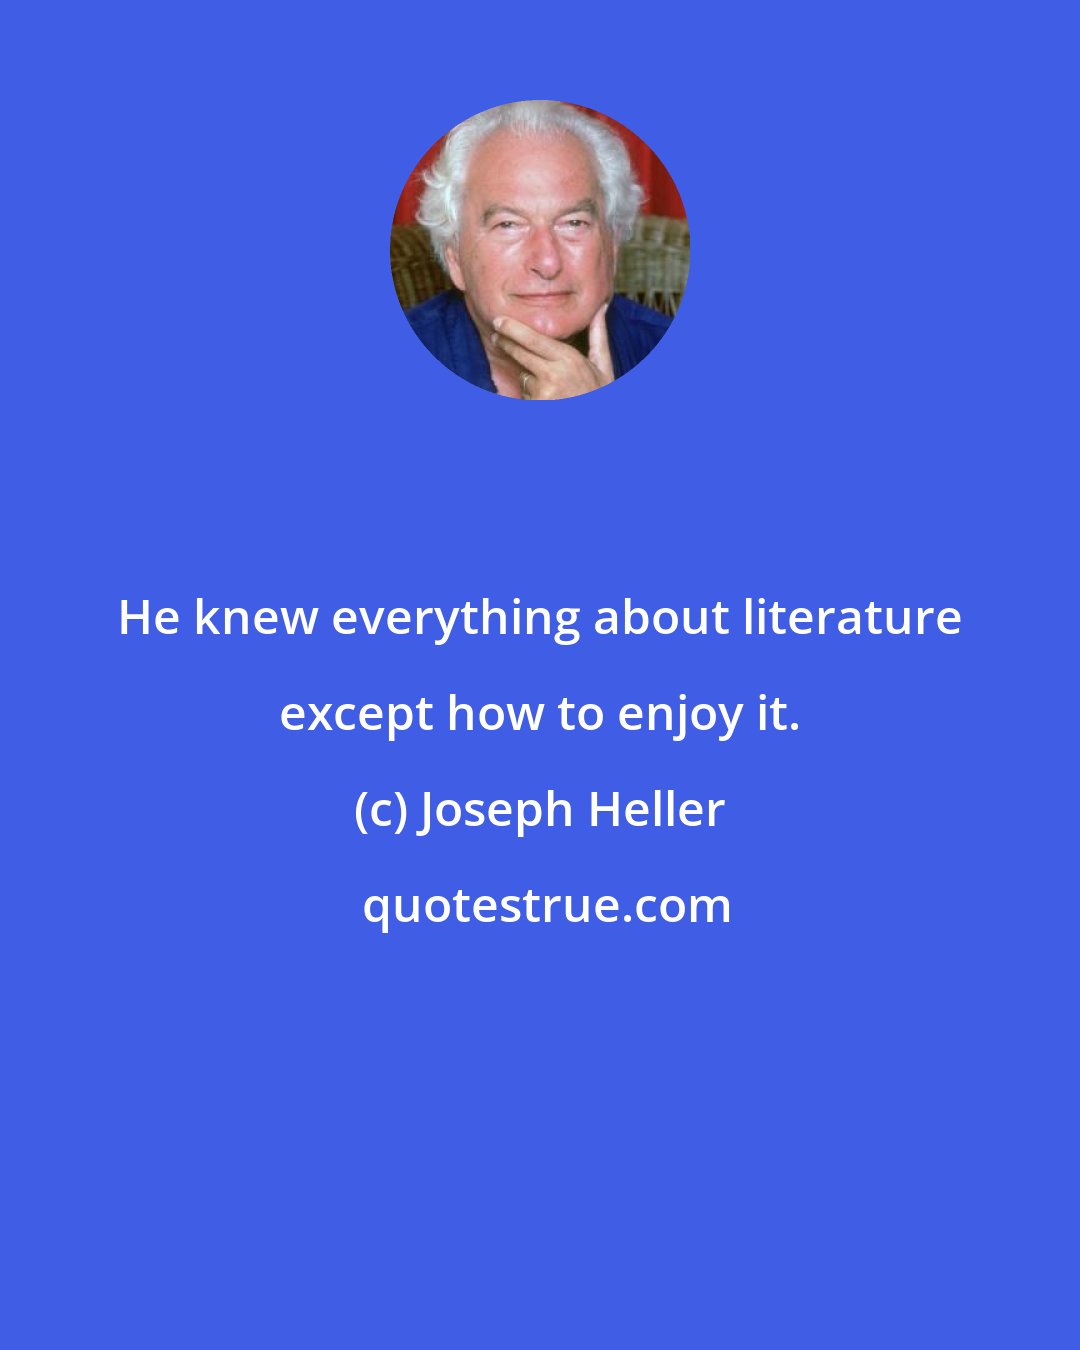 Joseph Heller: He knew everything about literature except how to enjoy it.